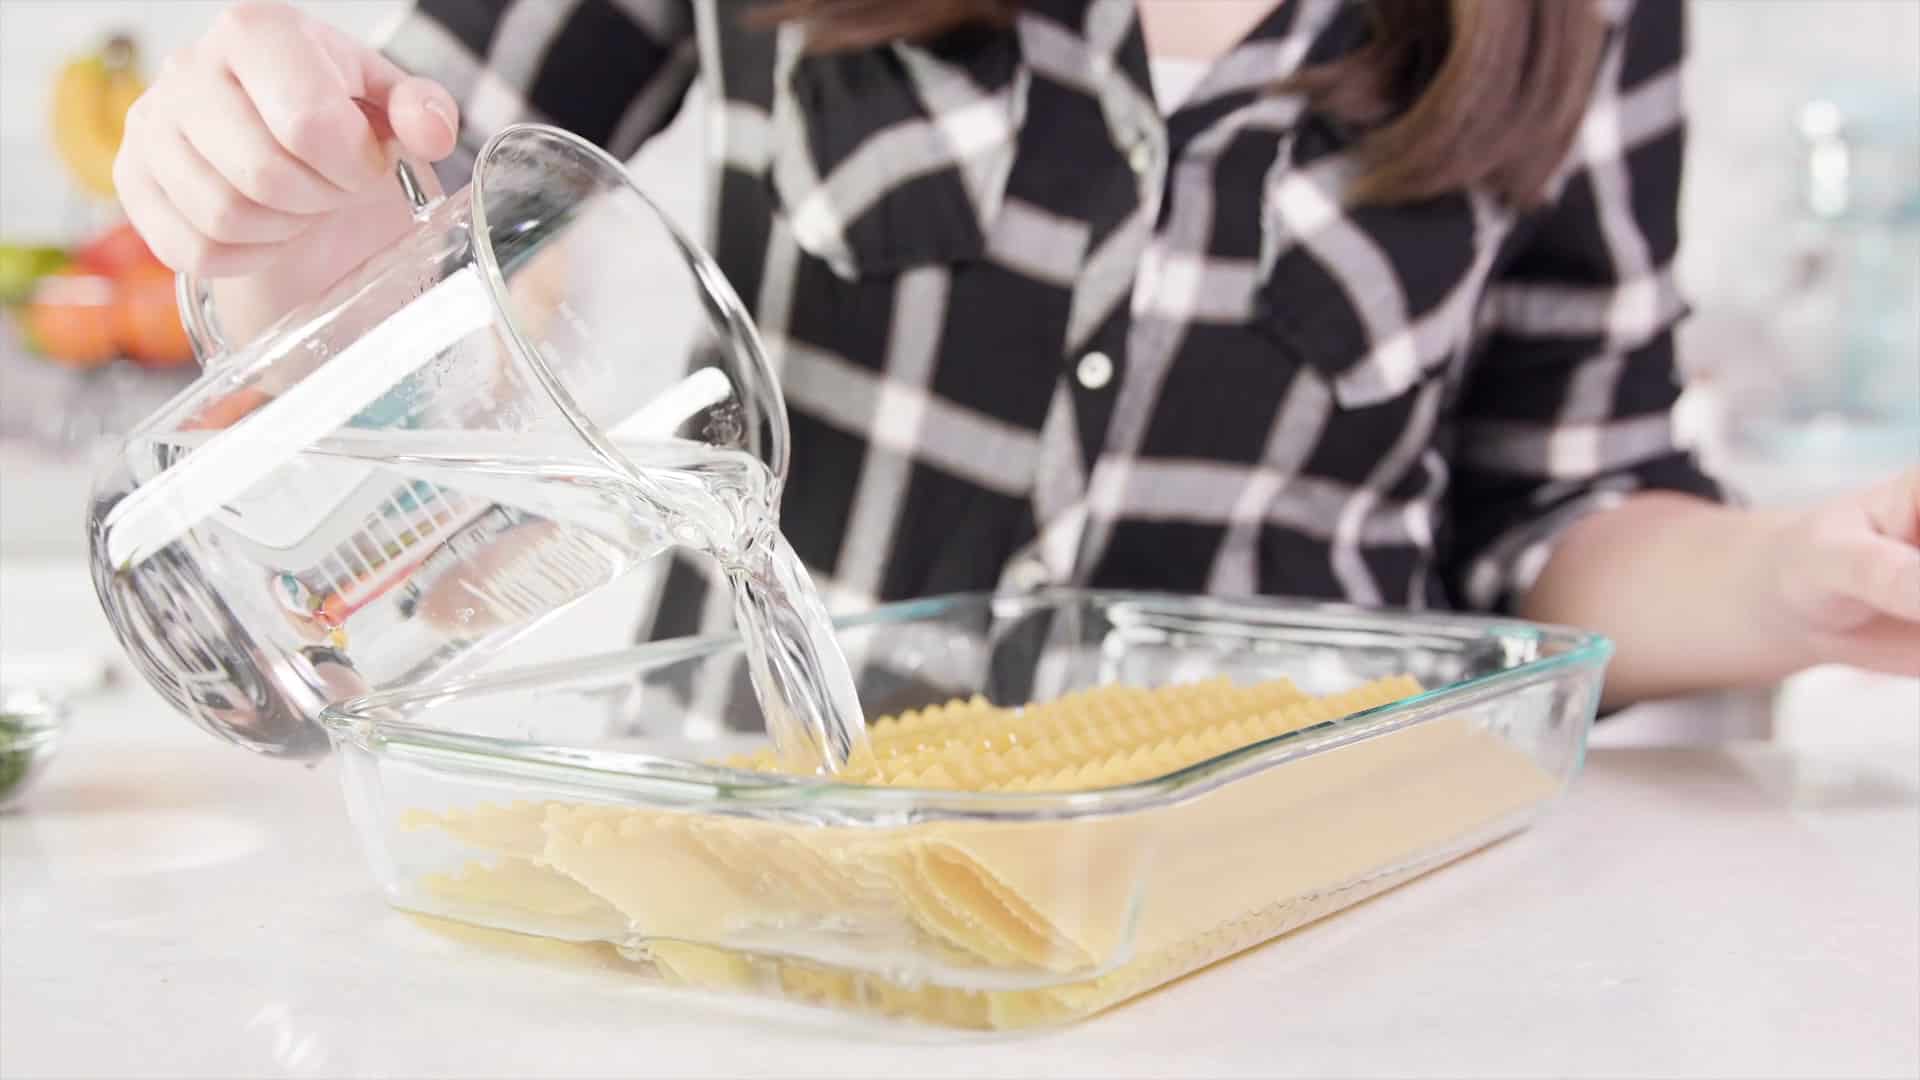 Angled view of a clear glass casserole dish filled with dry lasagna noodles being filled with water poured from a large clear glass measuring cup.